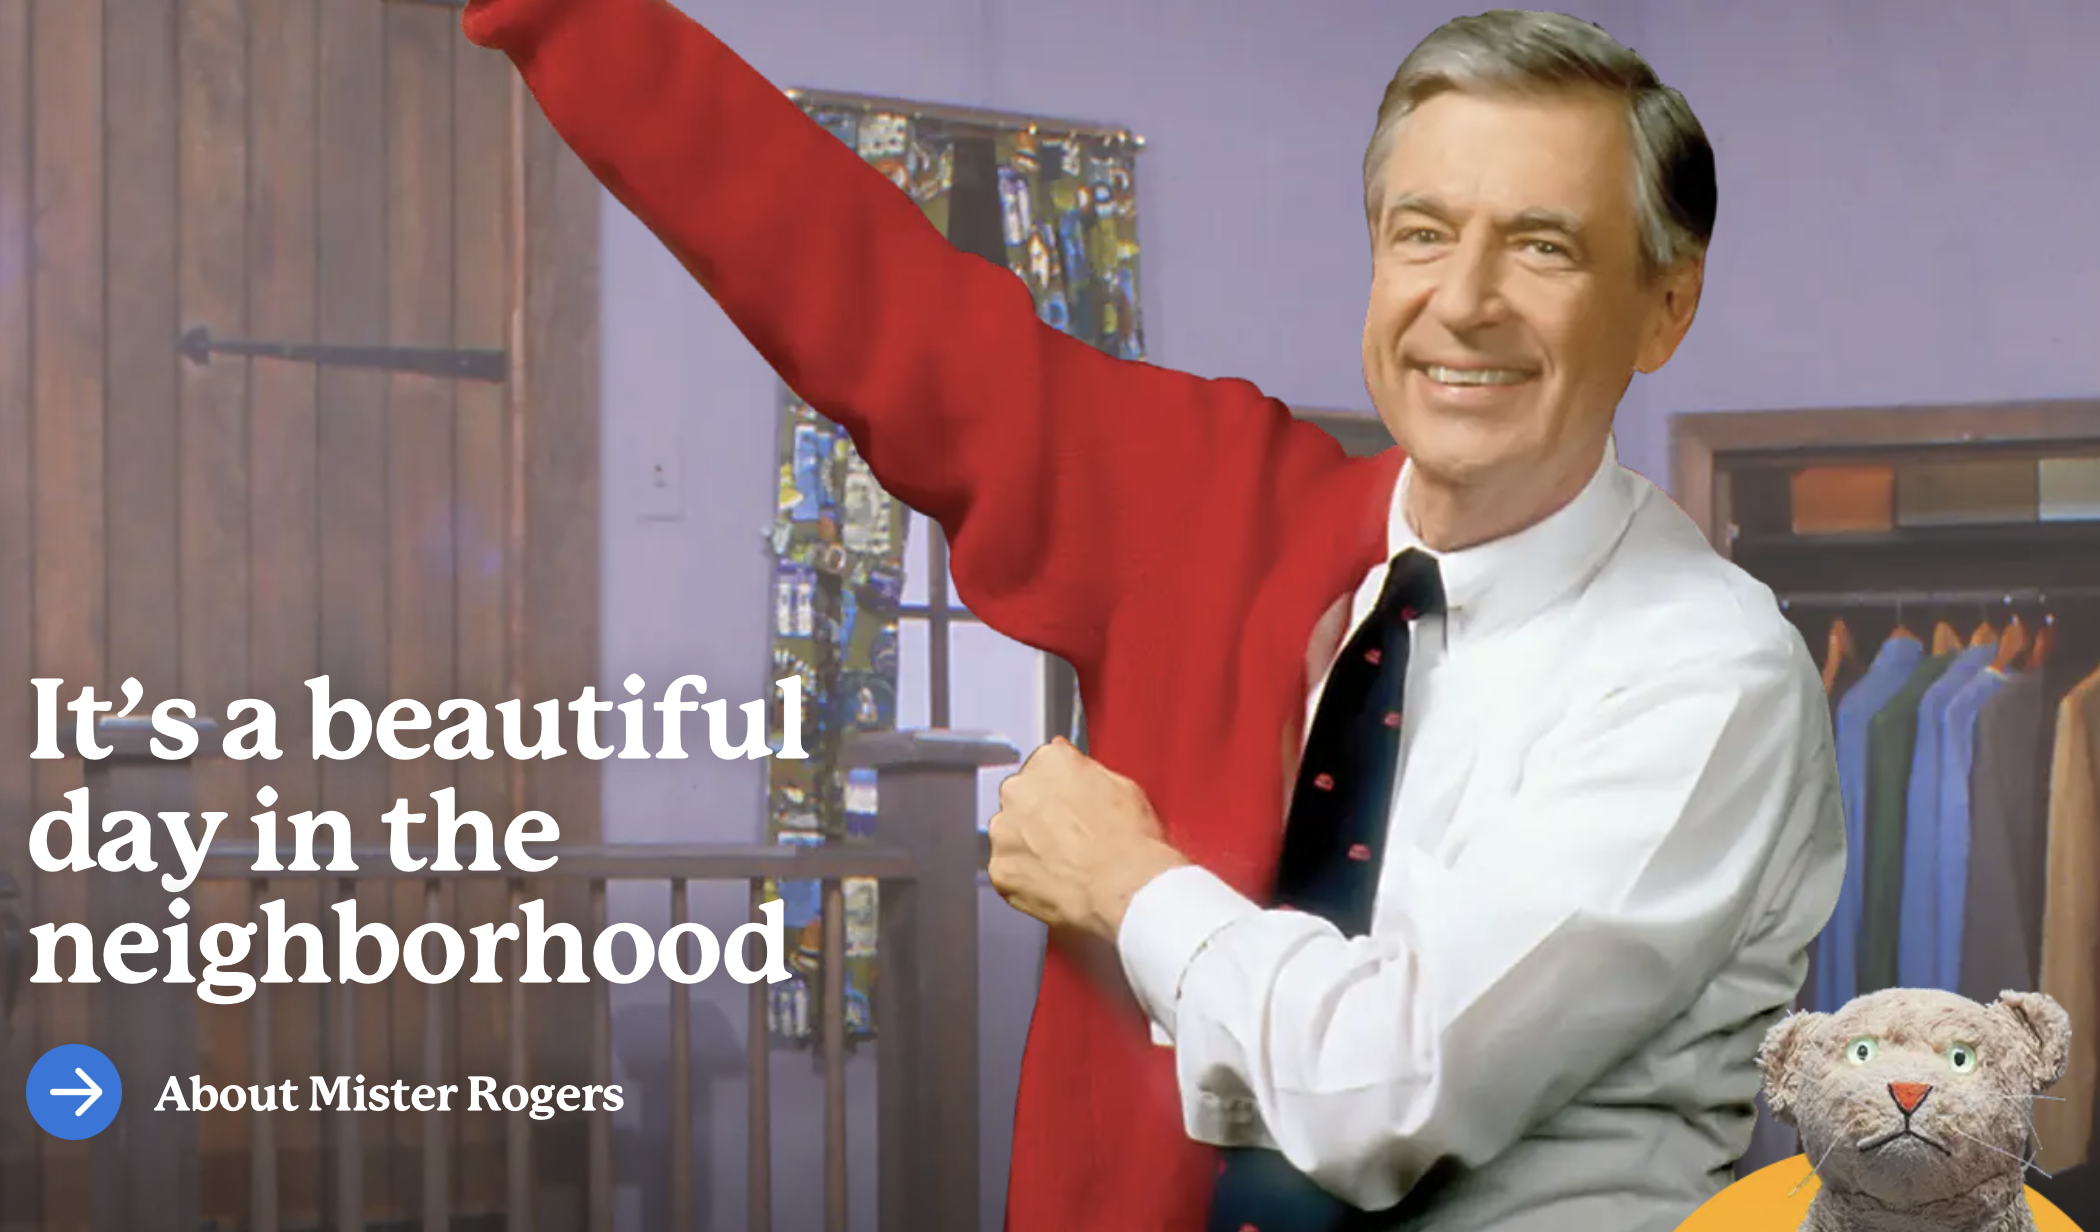 Text: "It's a beautiful day in the neighborhood" A man with puts on a red sweater with a small cat puppet in the bottom right.